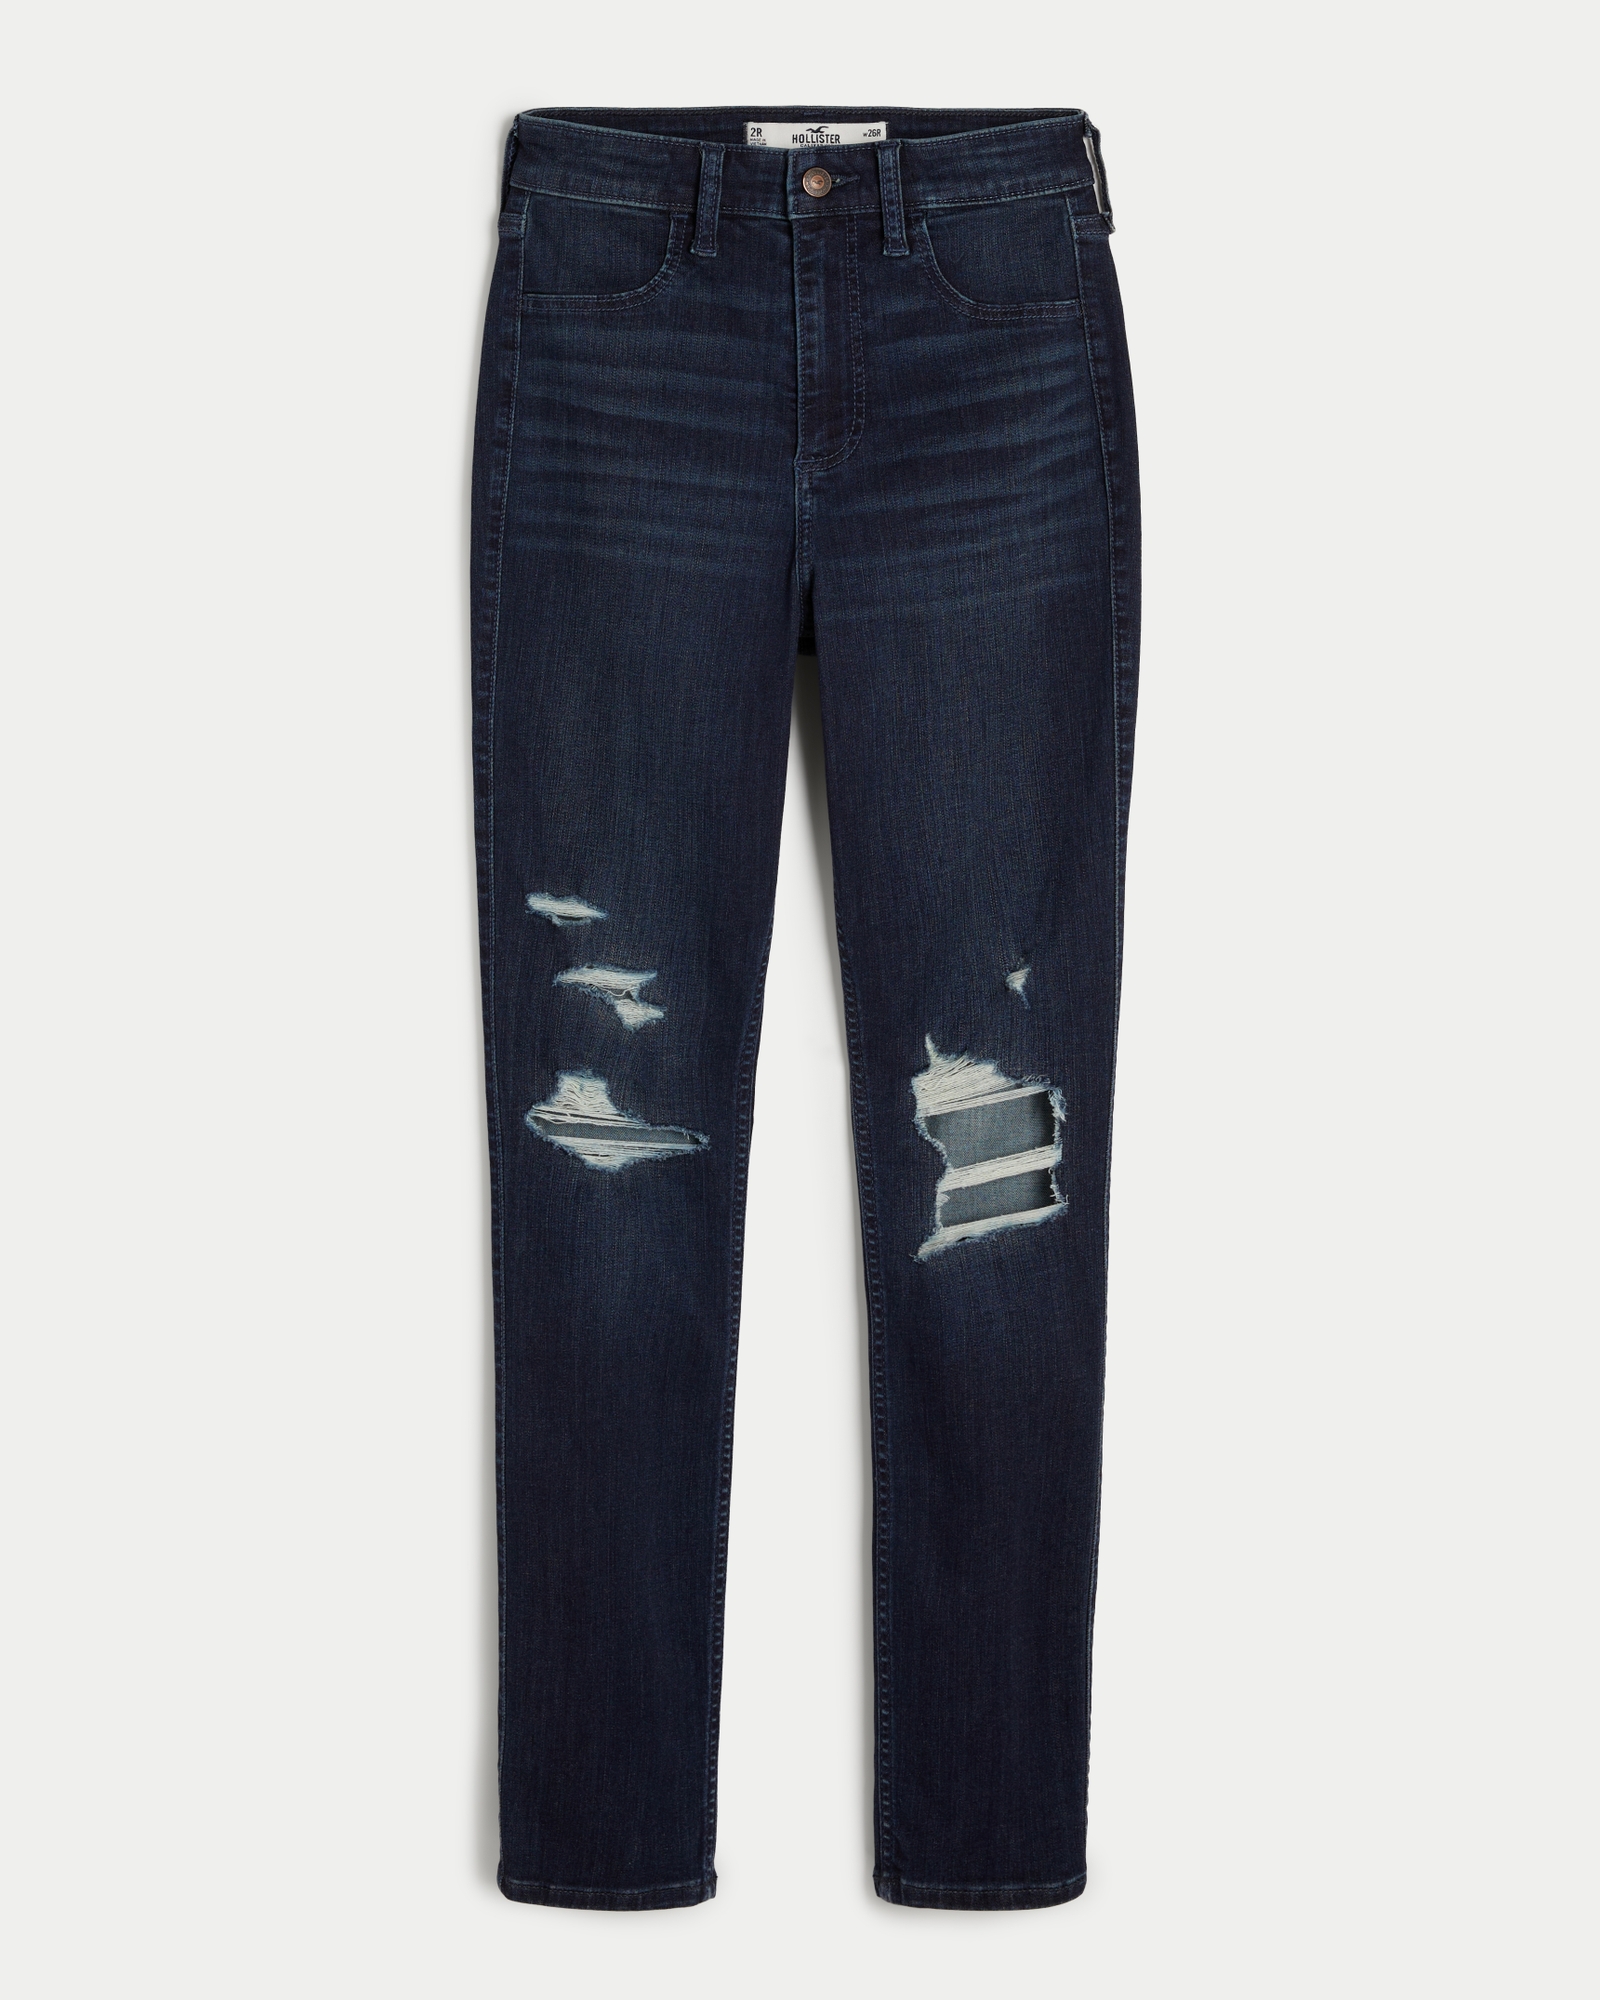 Hollister High Rise Jean Leggings  International Society of Precision  Agriculture